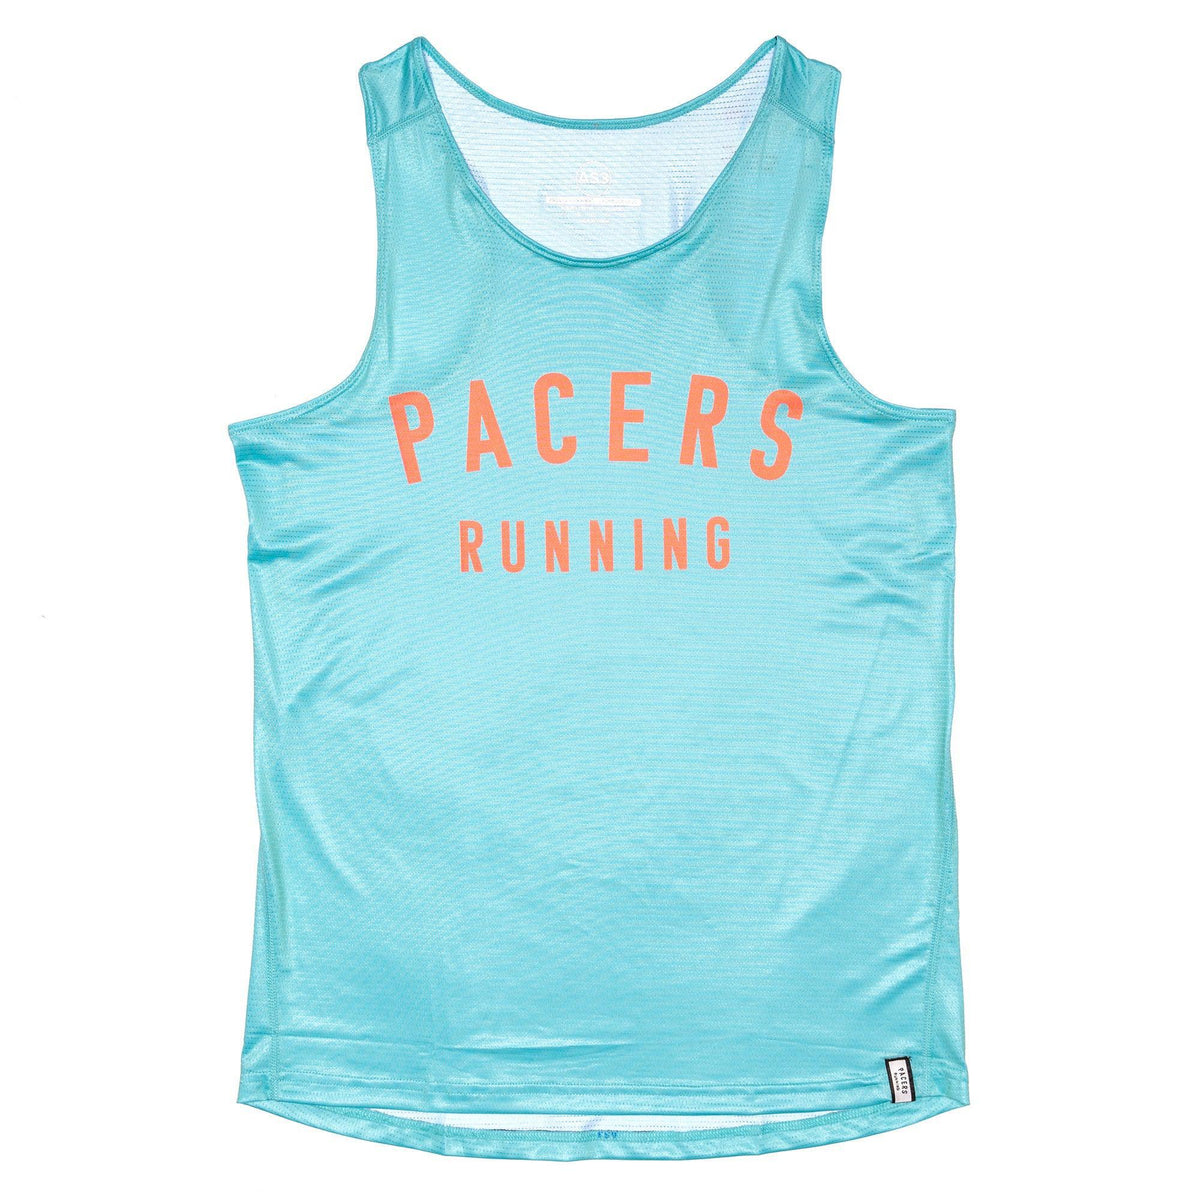 Pacers Running-2:02 Singlet - Pacers-Teal-Pacers Running